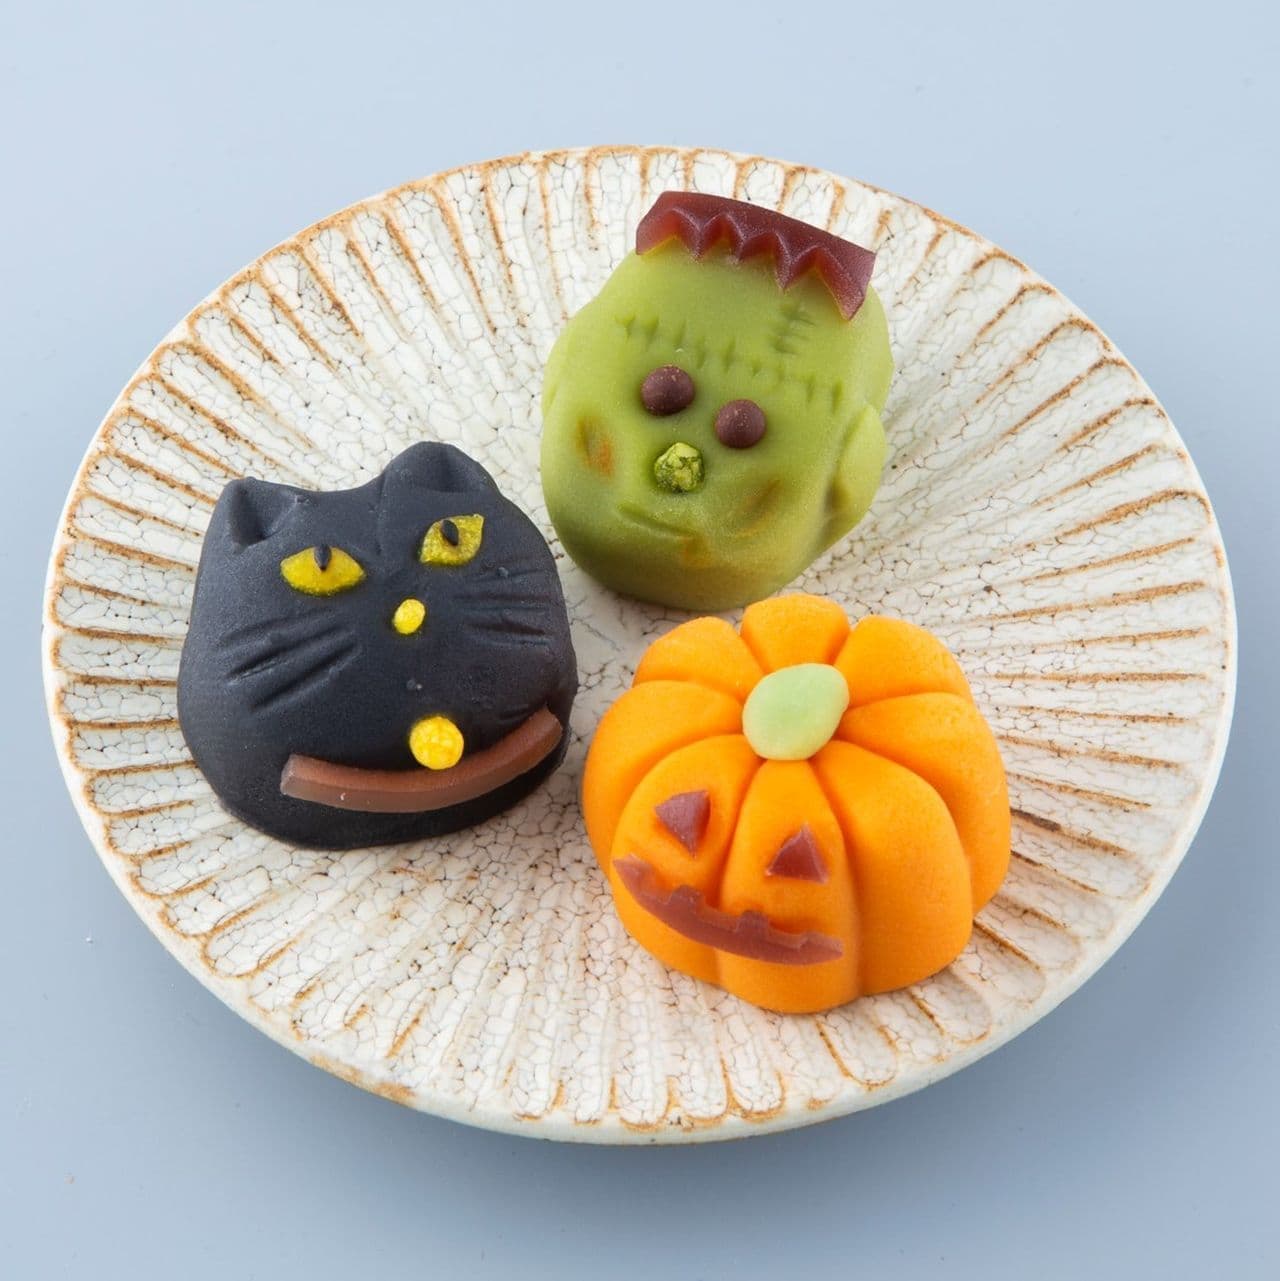 Chateraise's Creative Japanese Sweets with Halloween Motifs